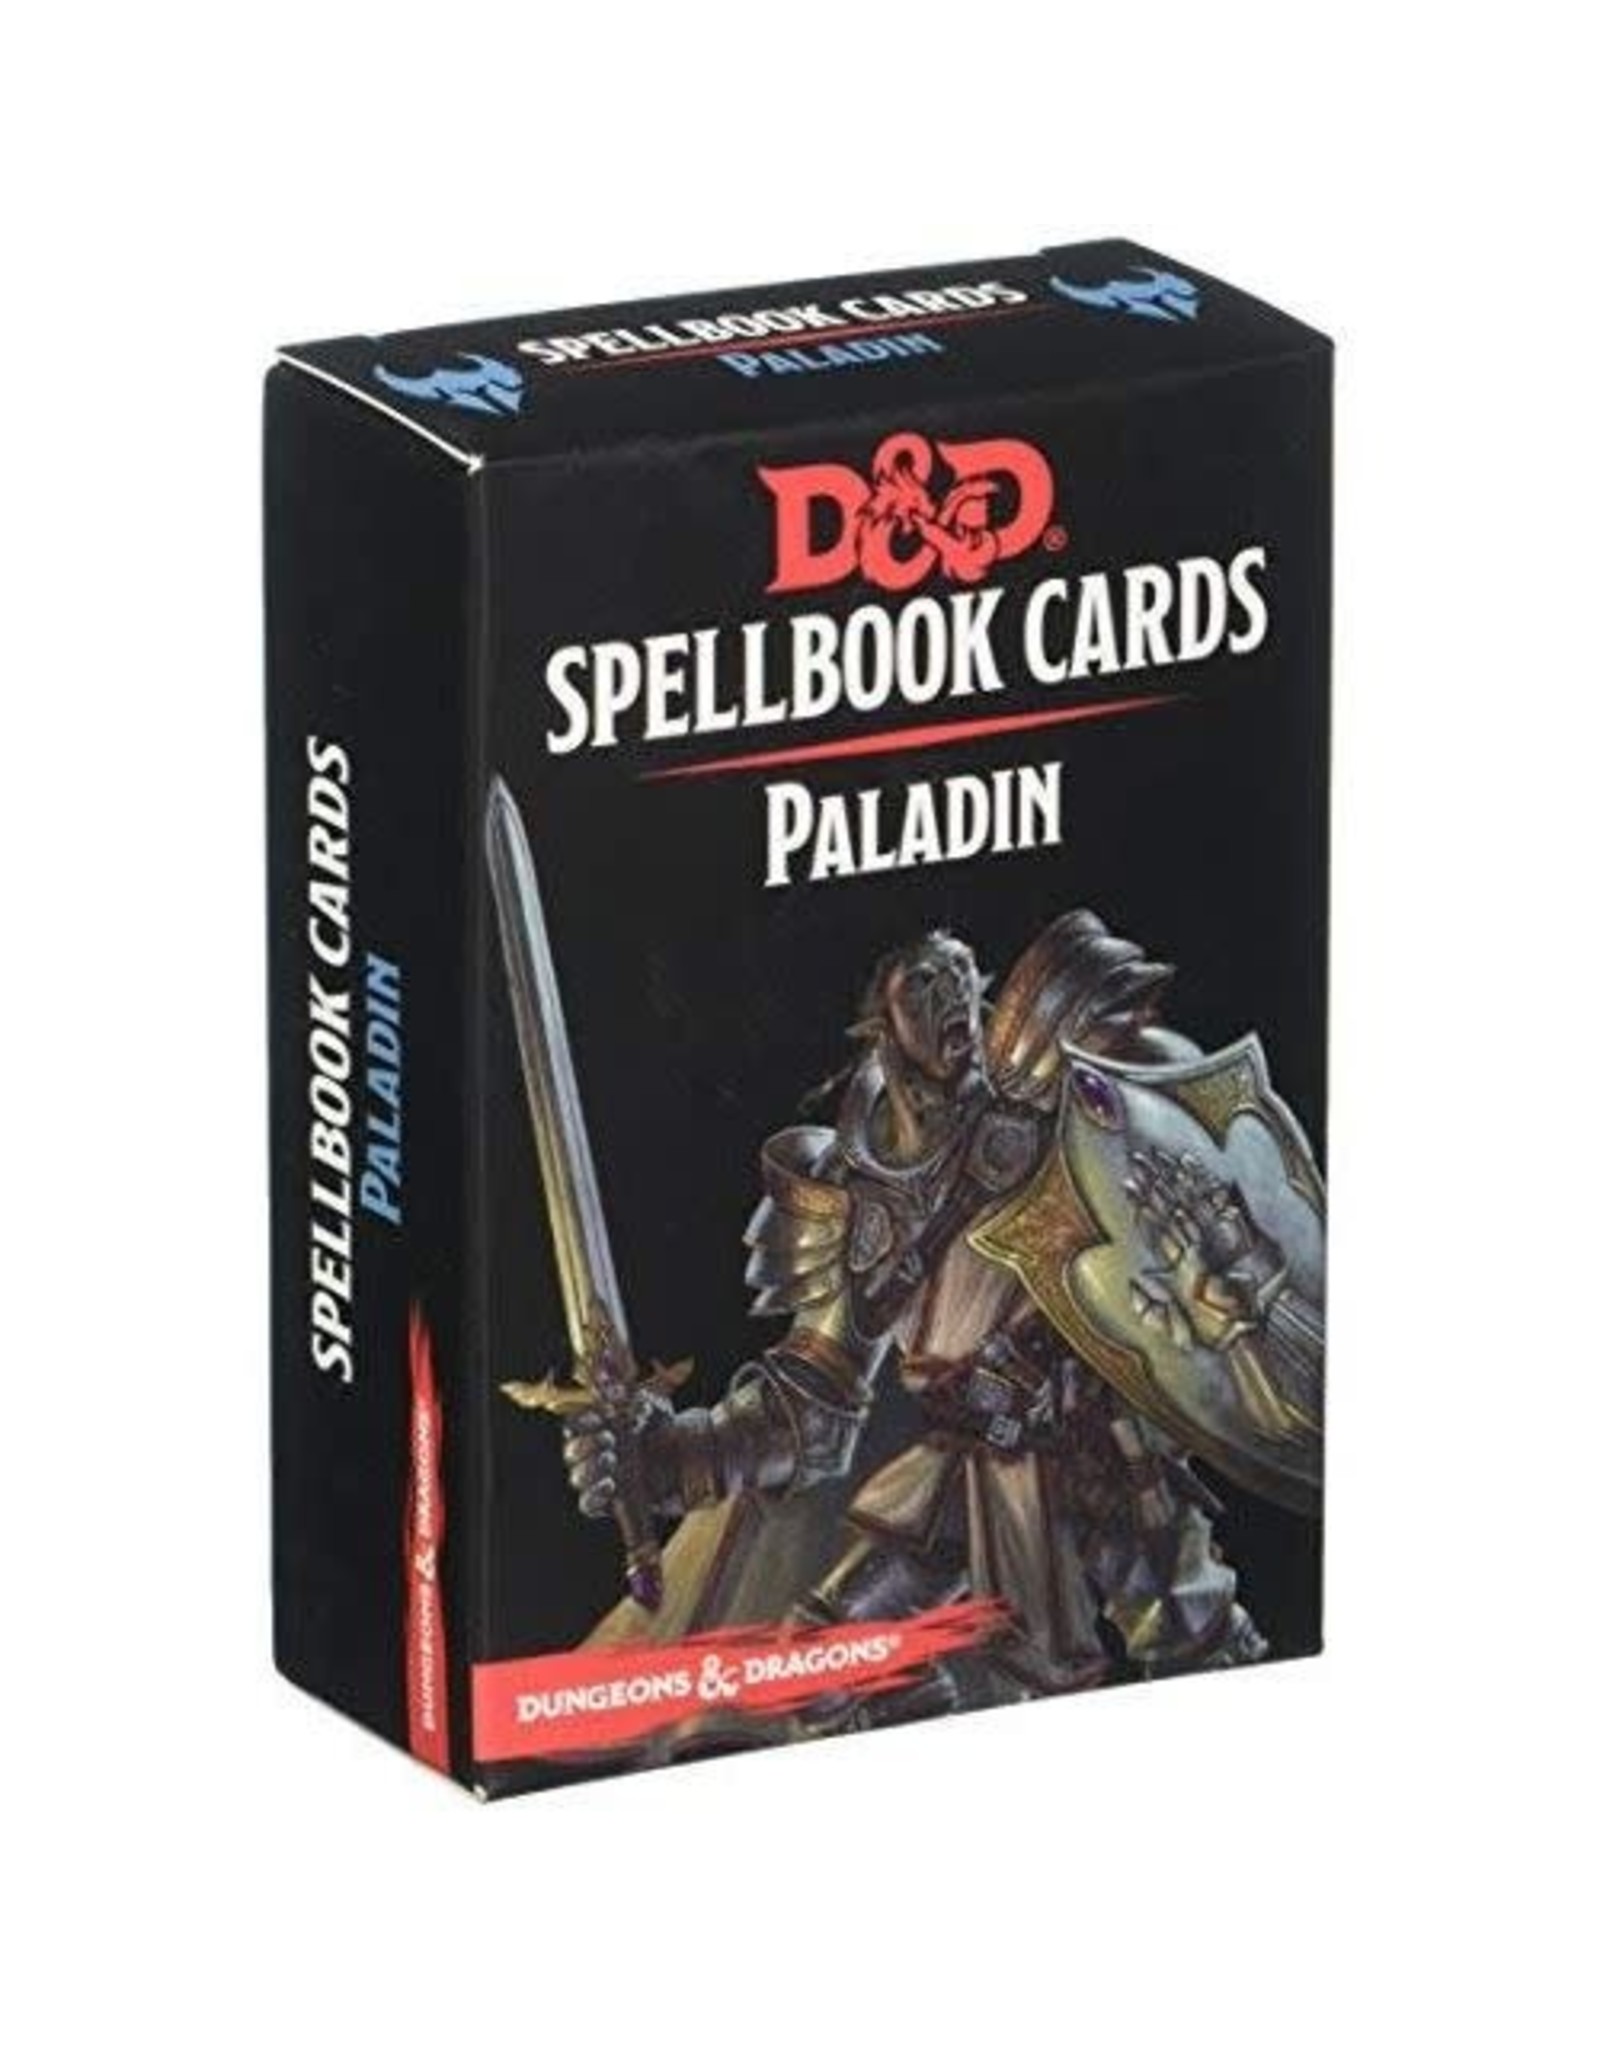 Gale Force 9 Dungeons & Dragons Spellbook Cards - Paladin Deck (69 cards)